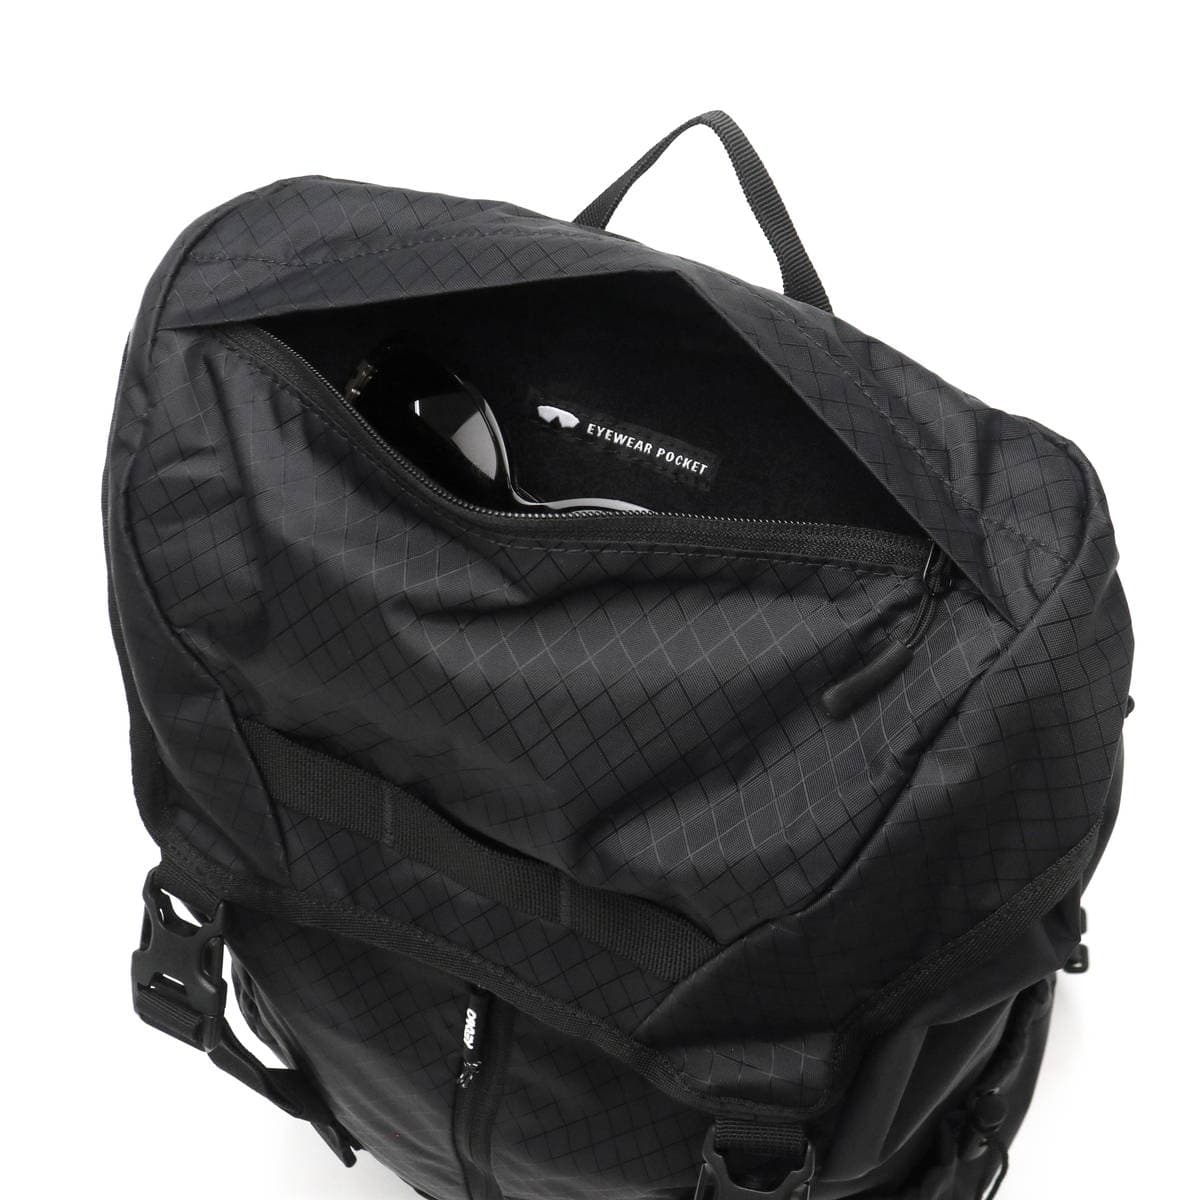 ⭐️ 新品未使用 OAKLEY ⭐️ Voyager Backpack リュック